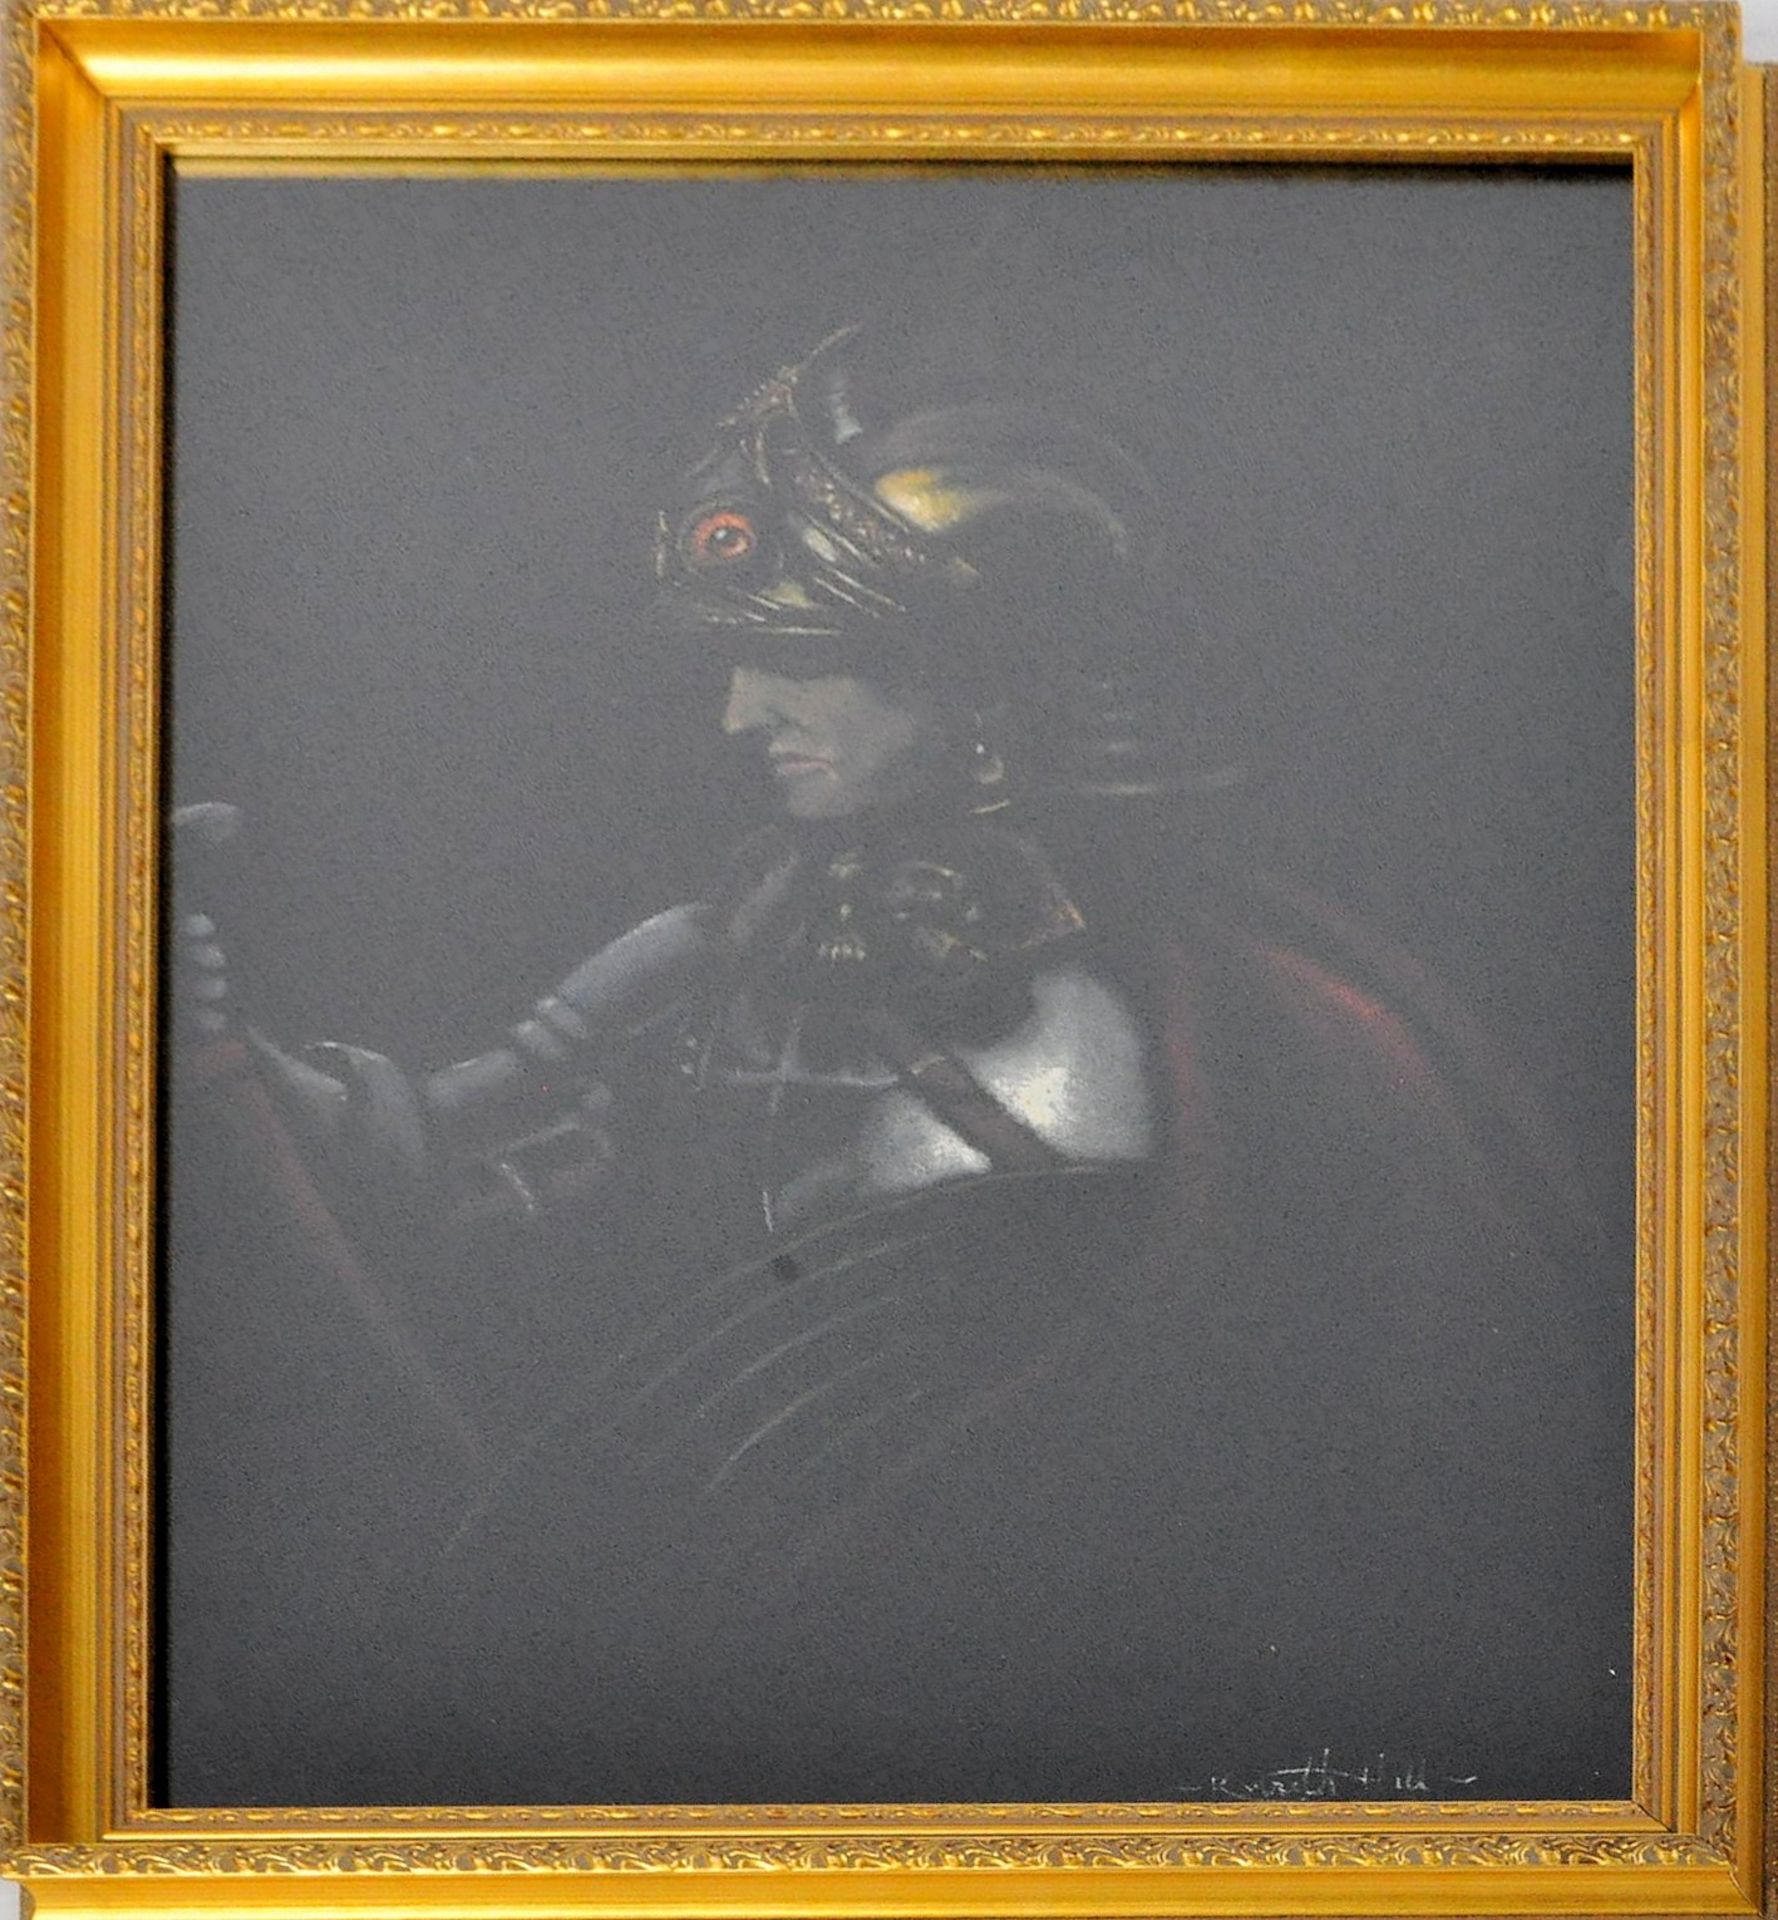 KENNETH HILL - BLACK KNIGHT - OIL ON FABRIC PAINTING